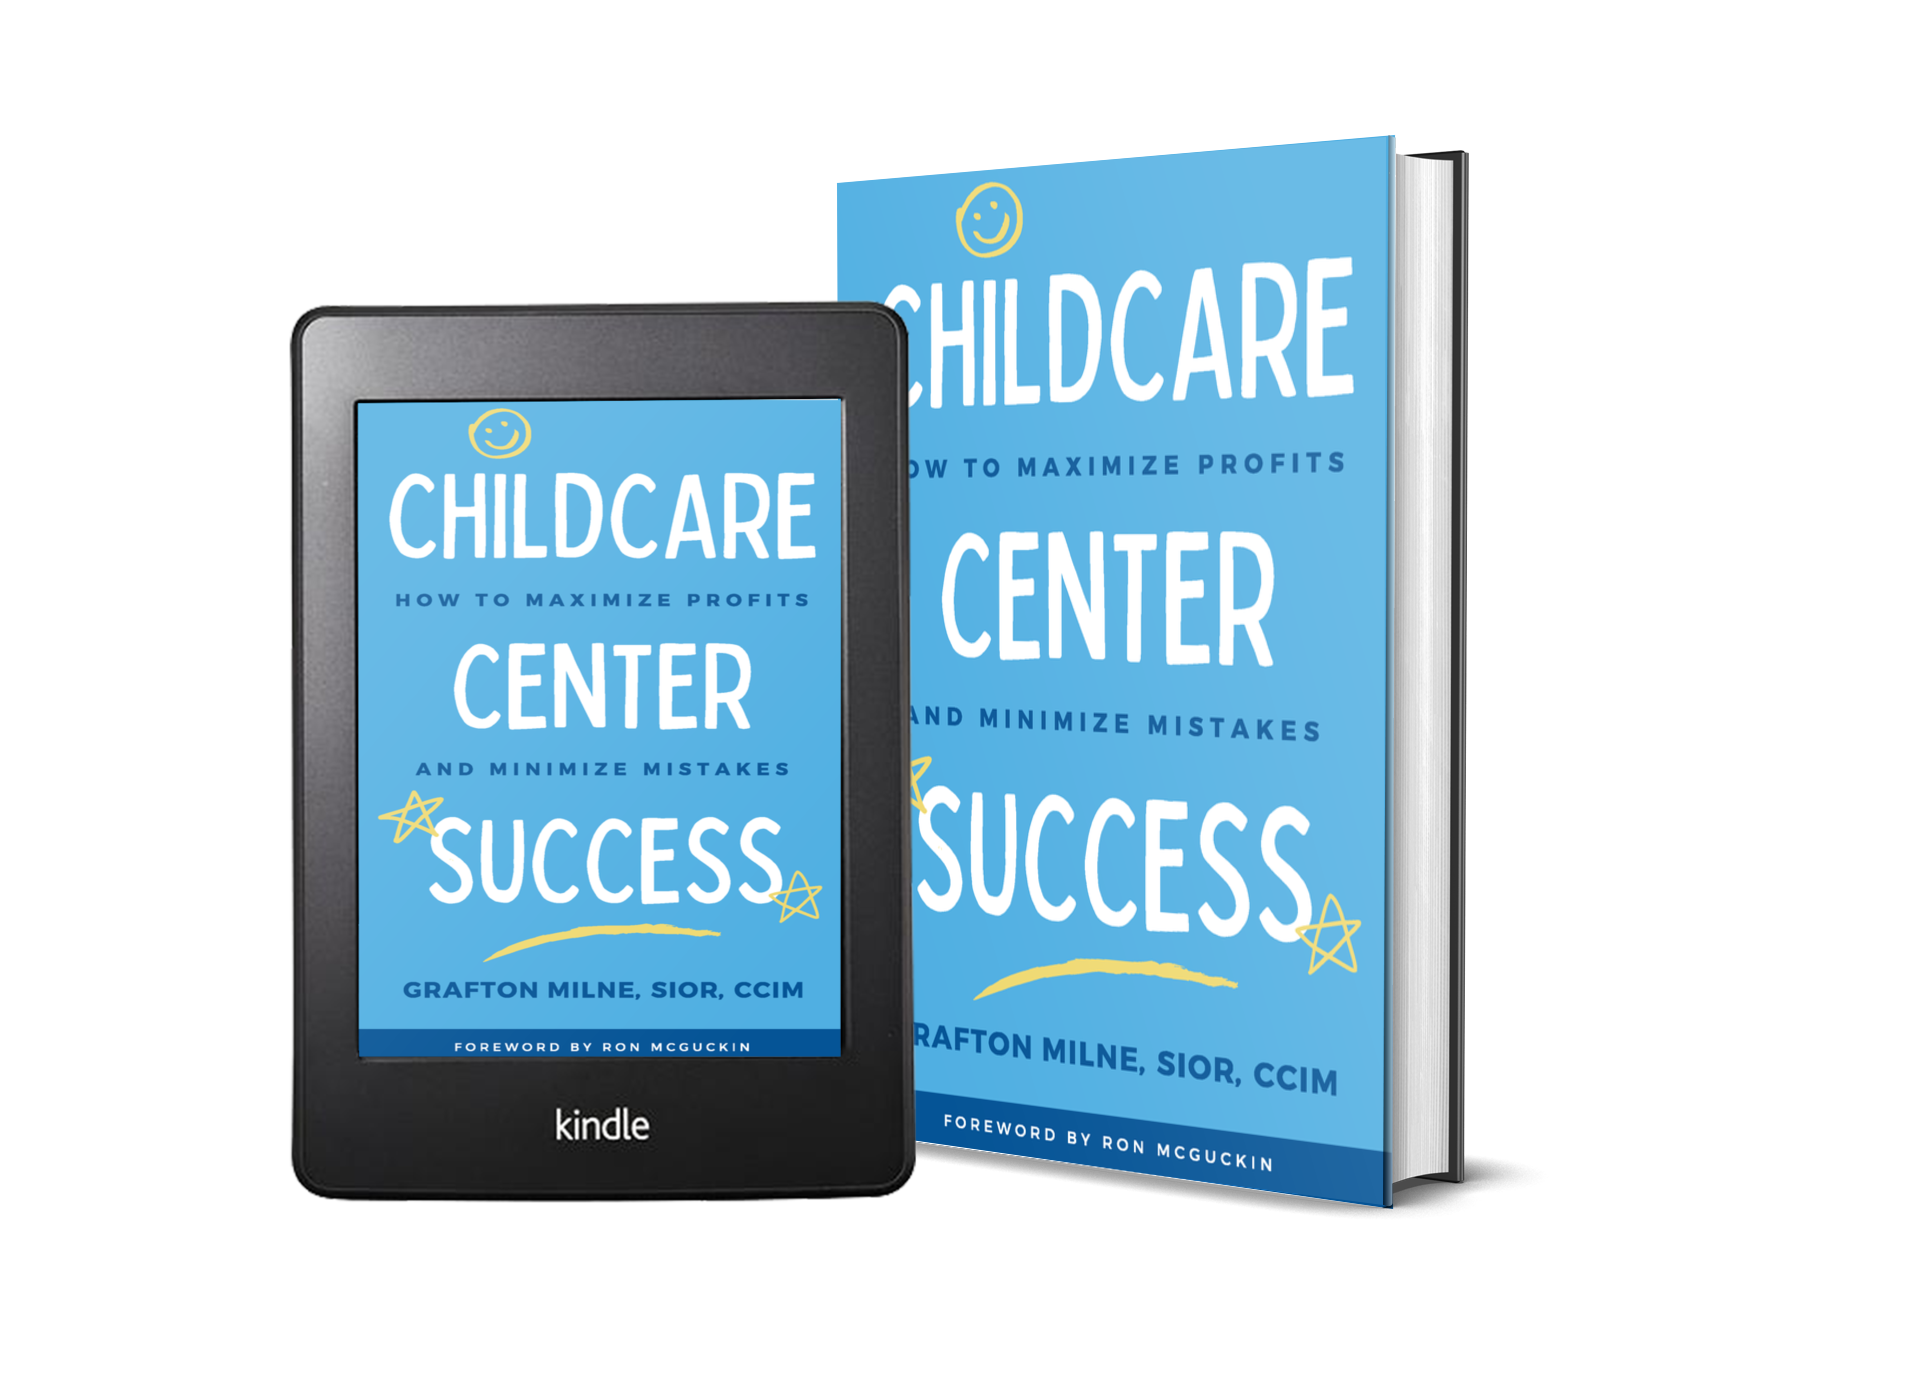 Menlo Group Co-Founder Releases New Book to Help Childcare Center Owners